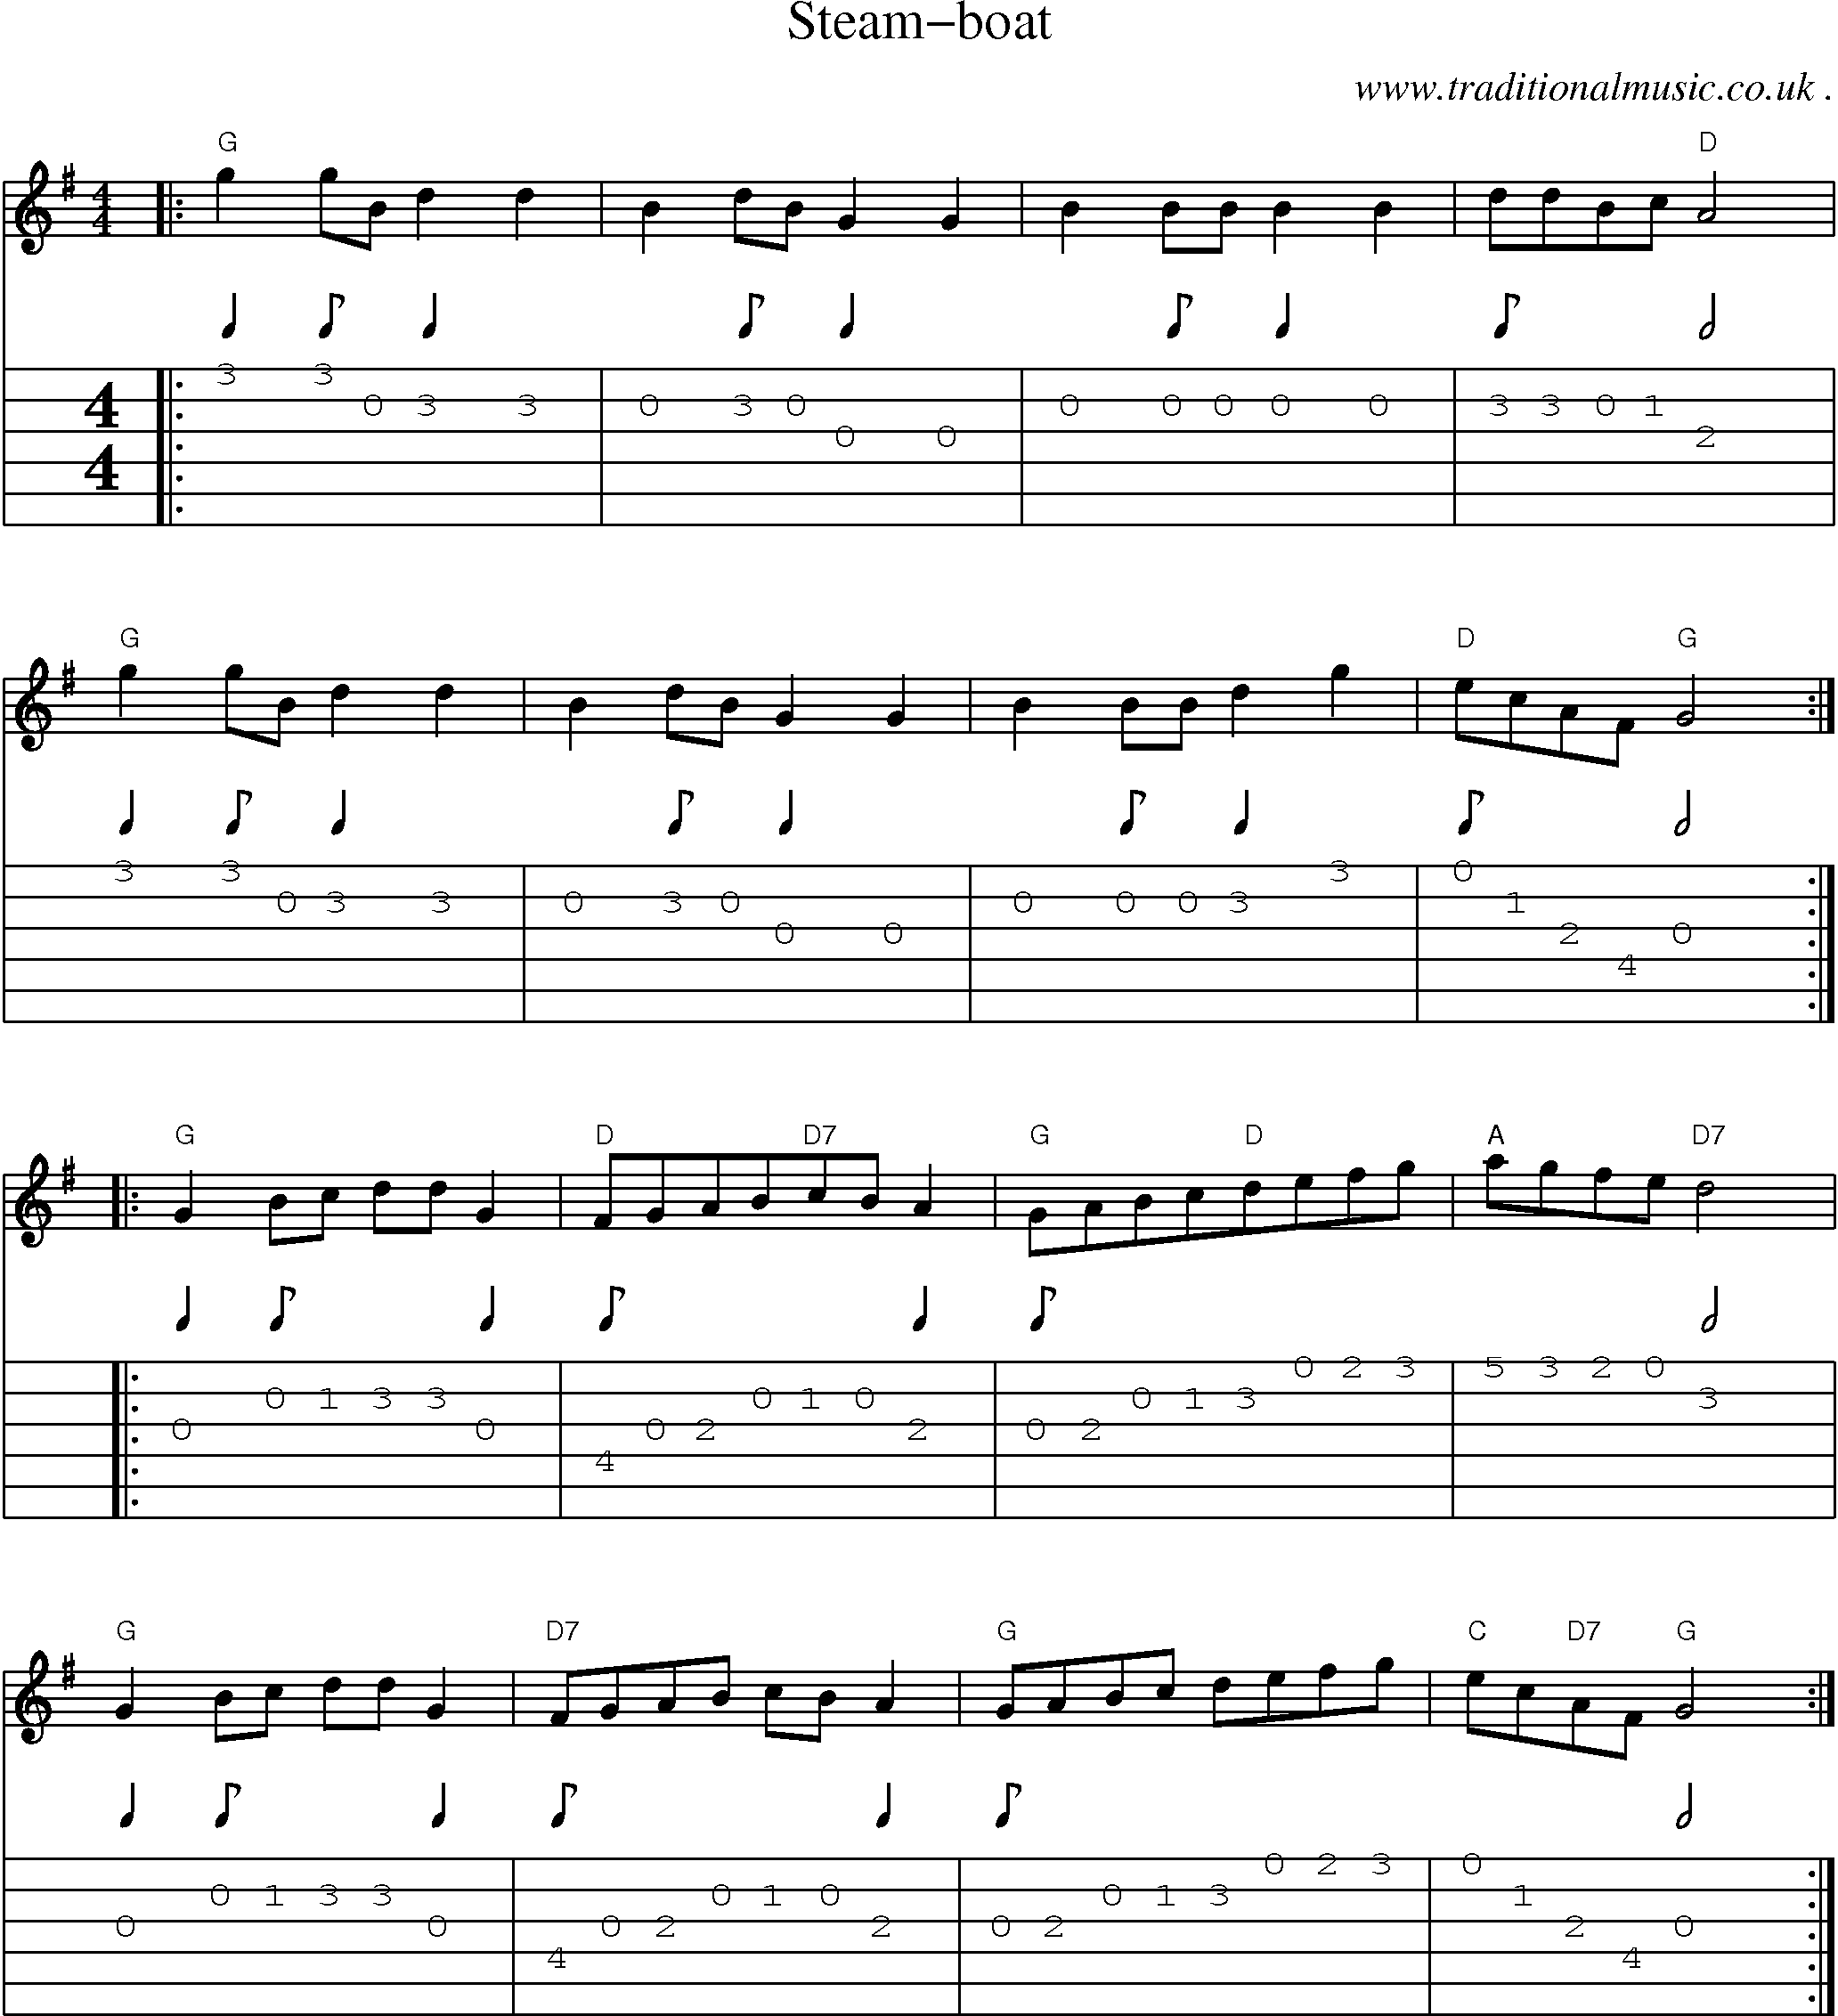 Sheet-Music and Guitar Tabs for Steam-boat